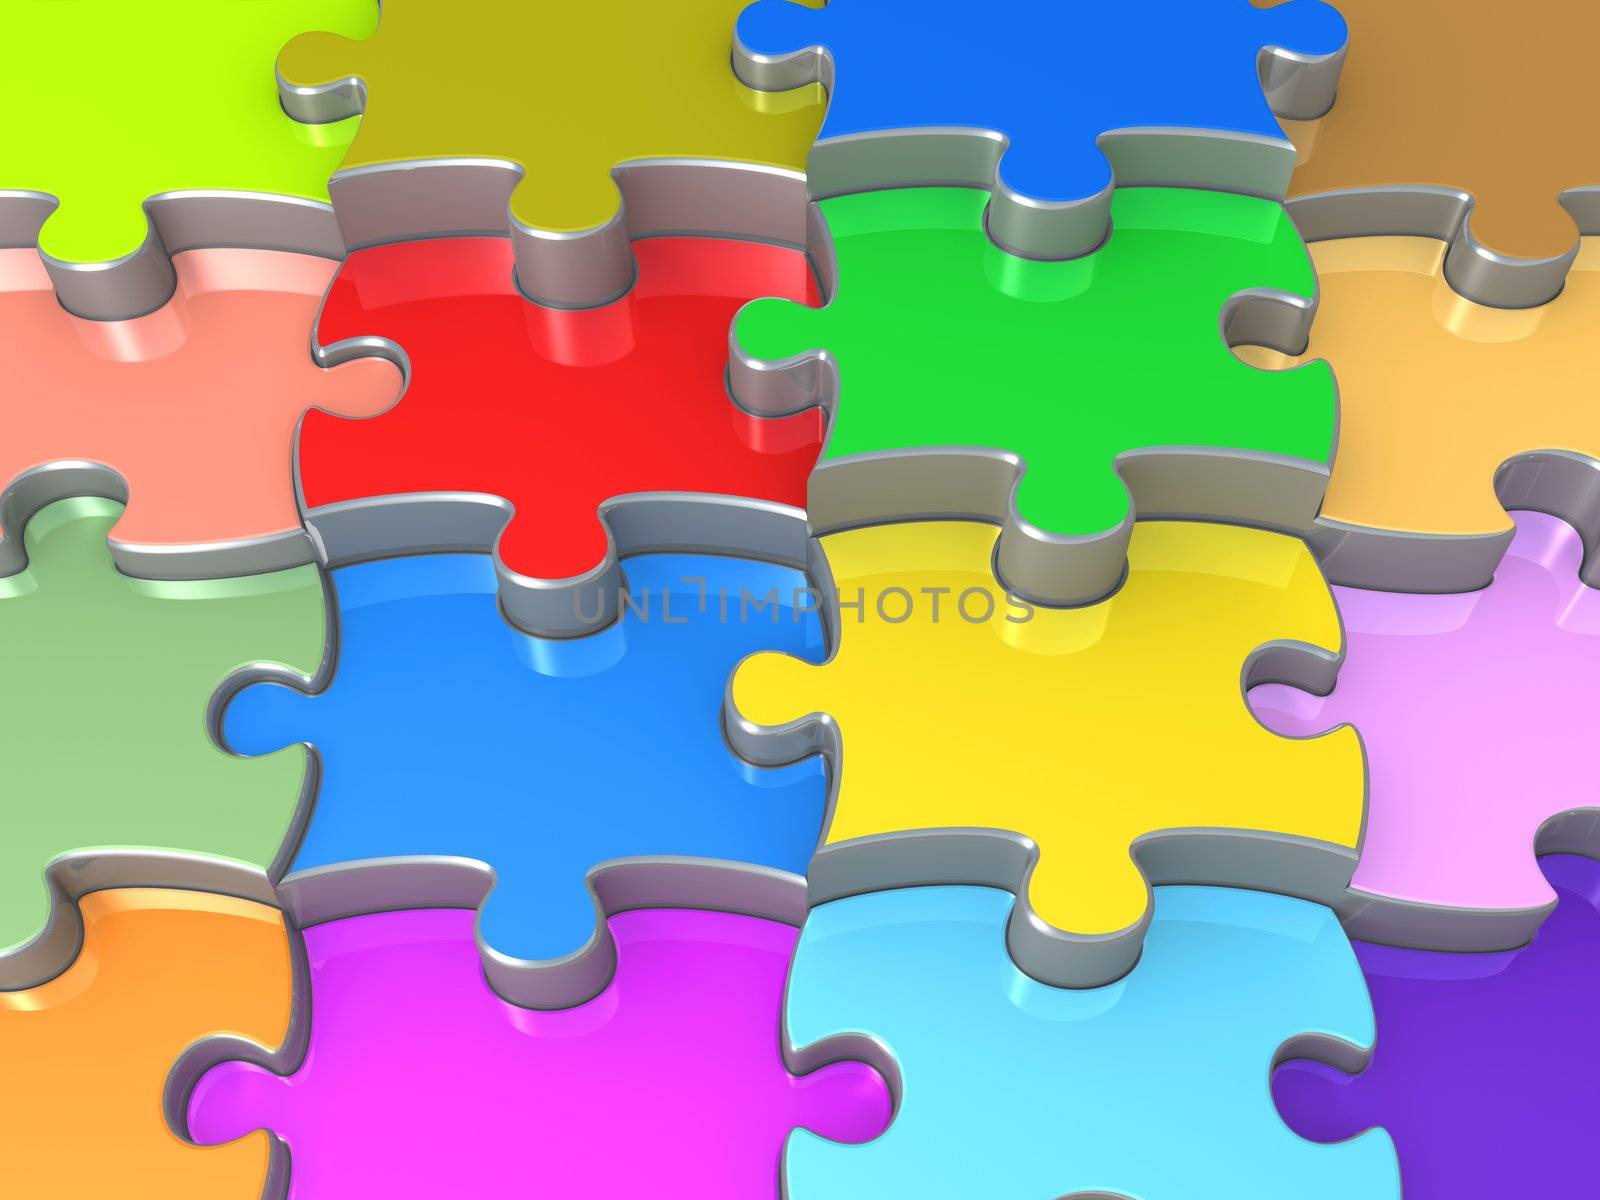 3D Jigsaw Puzzle by 3pod